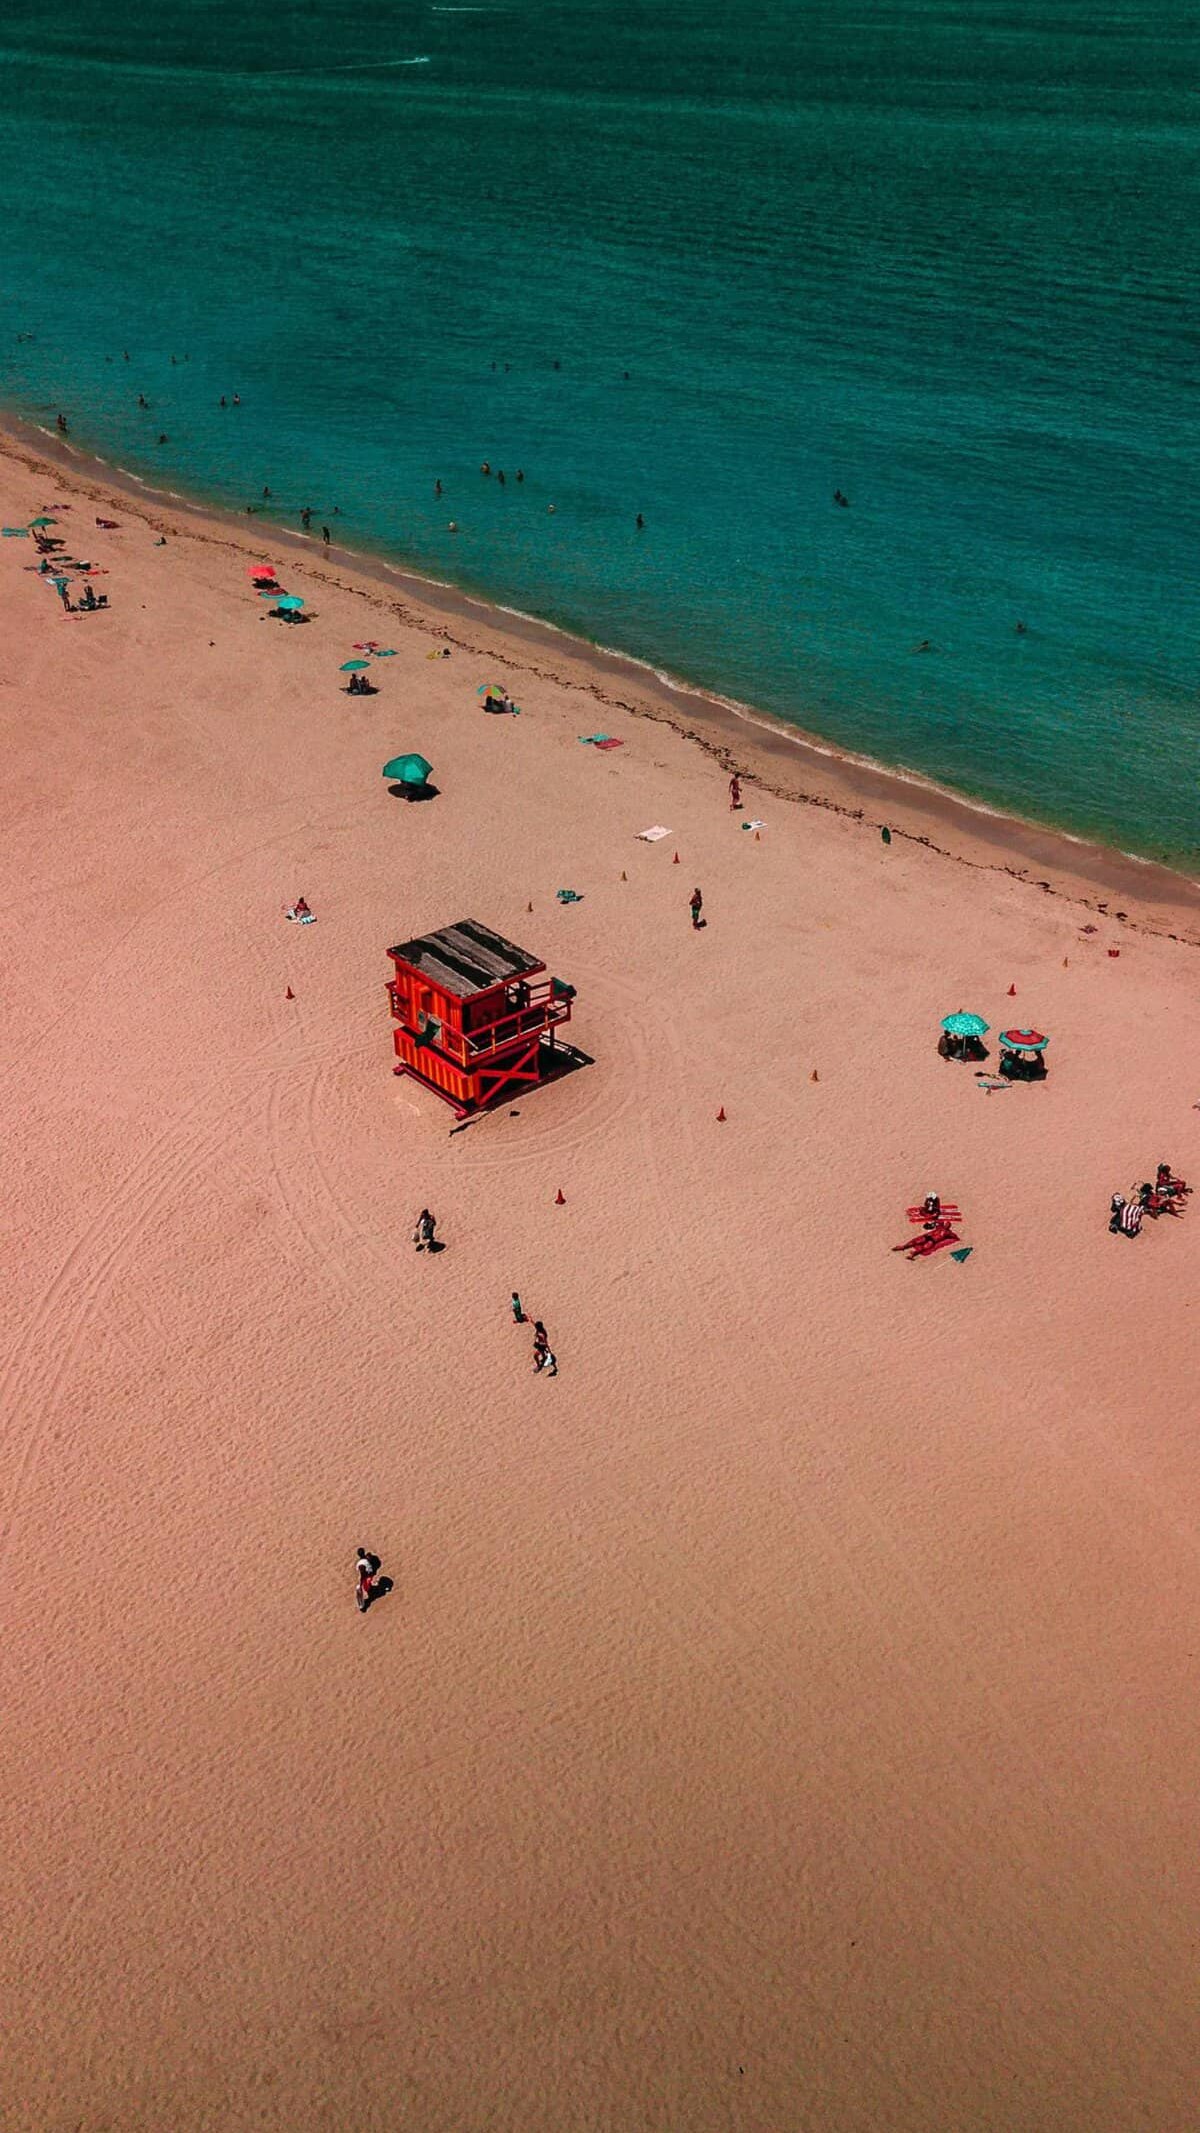 Drone shot of South Beach in Miami with the Iconic Pink Life Guard shack